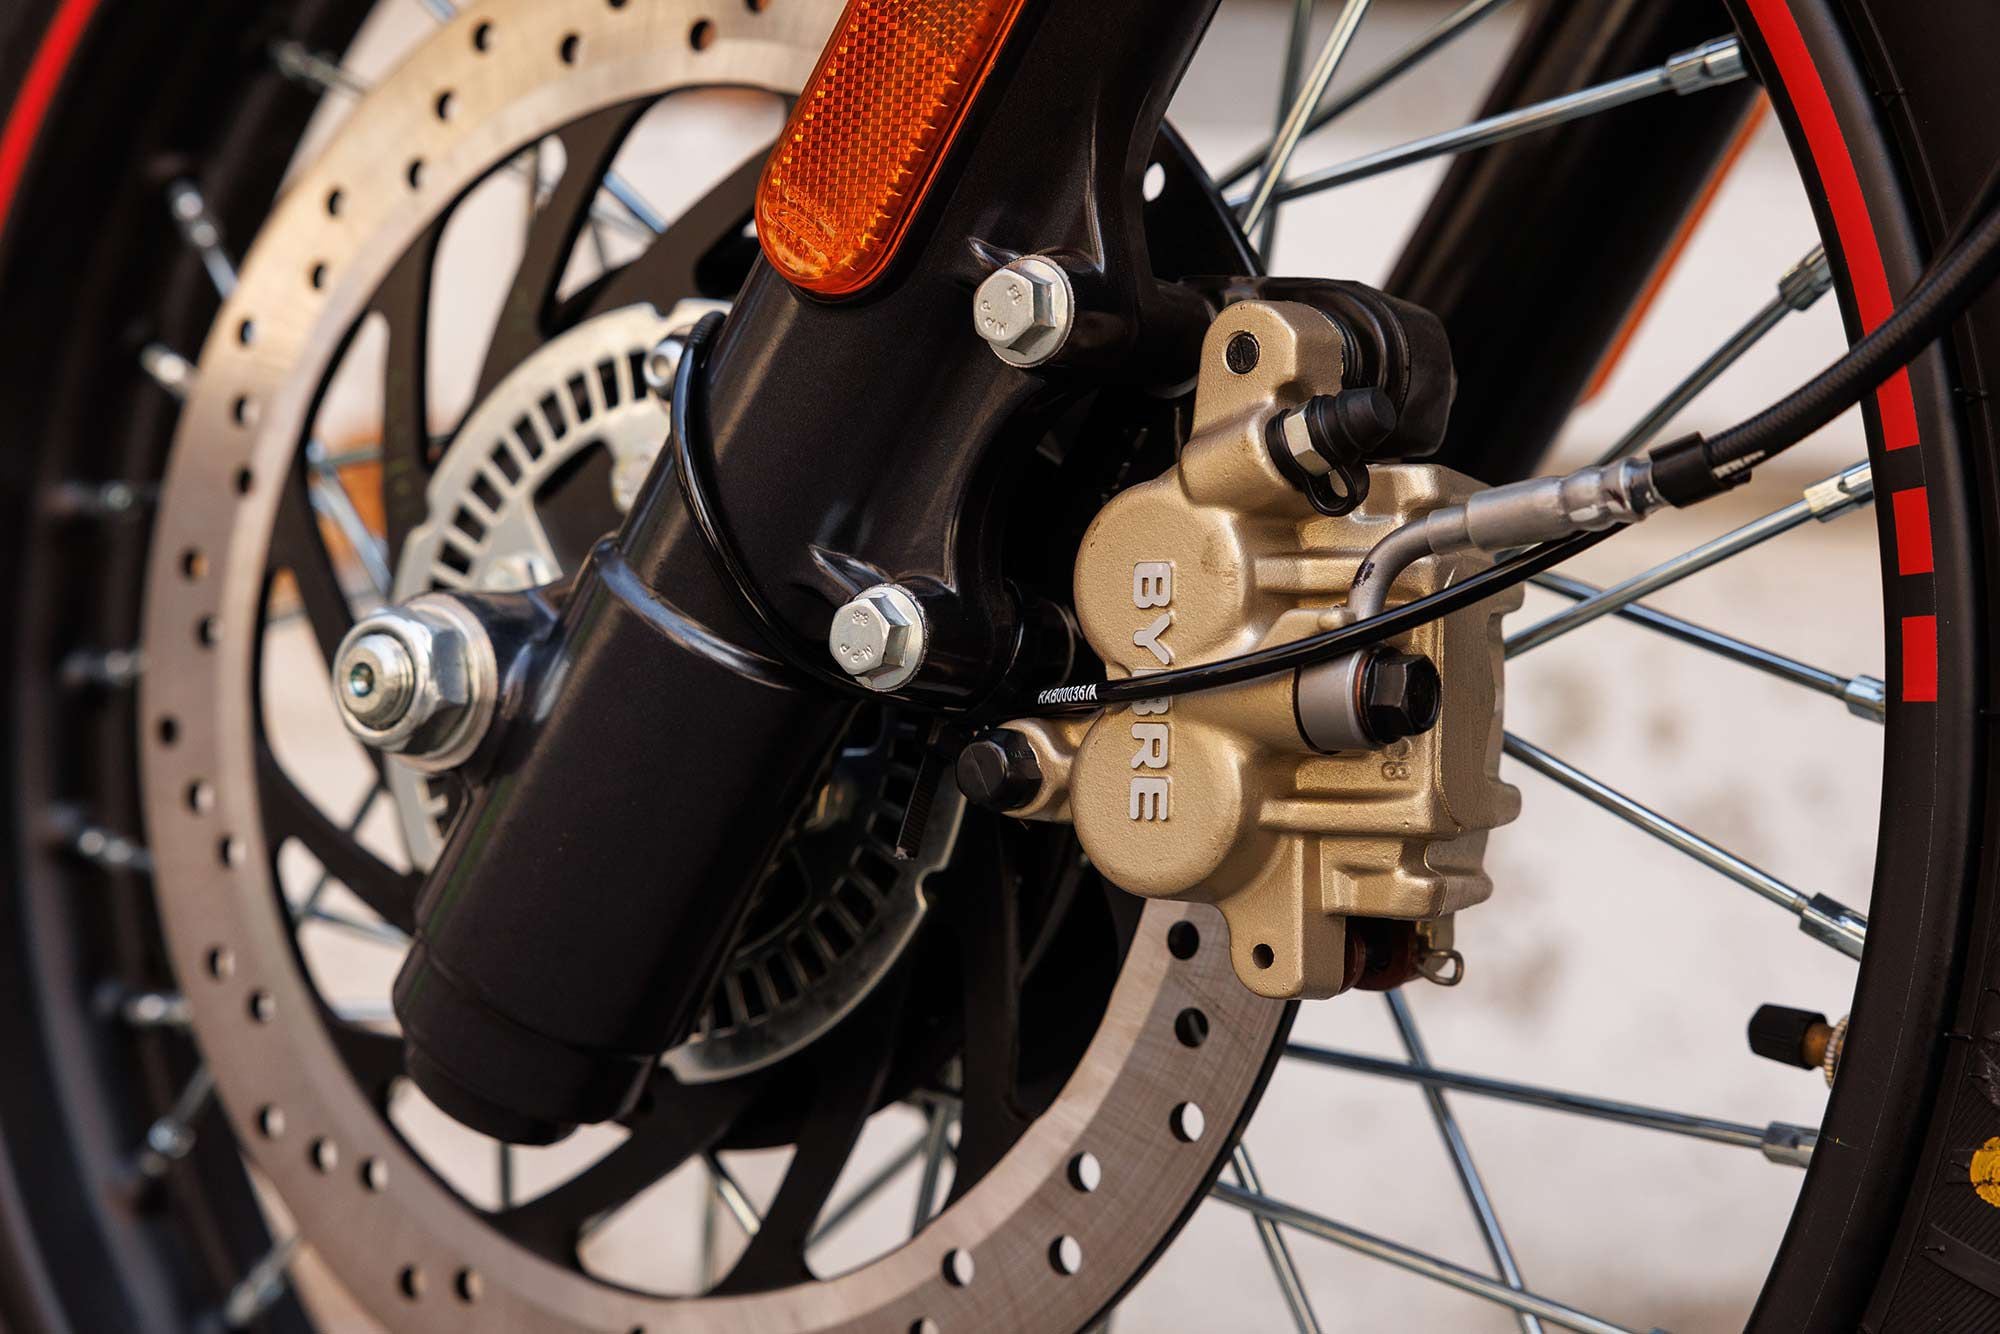 The brake system is a direct carryover from the Himalayan, with a ByBre single disc and two-piston caliper up front offering only so-so stopping power.